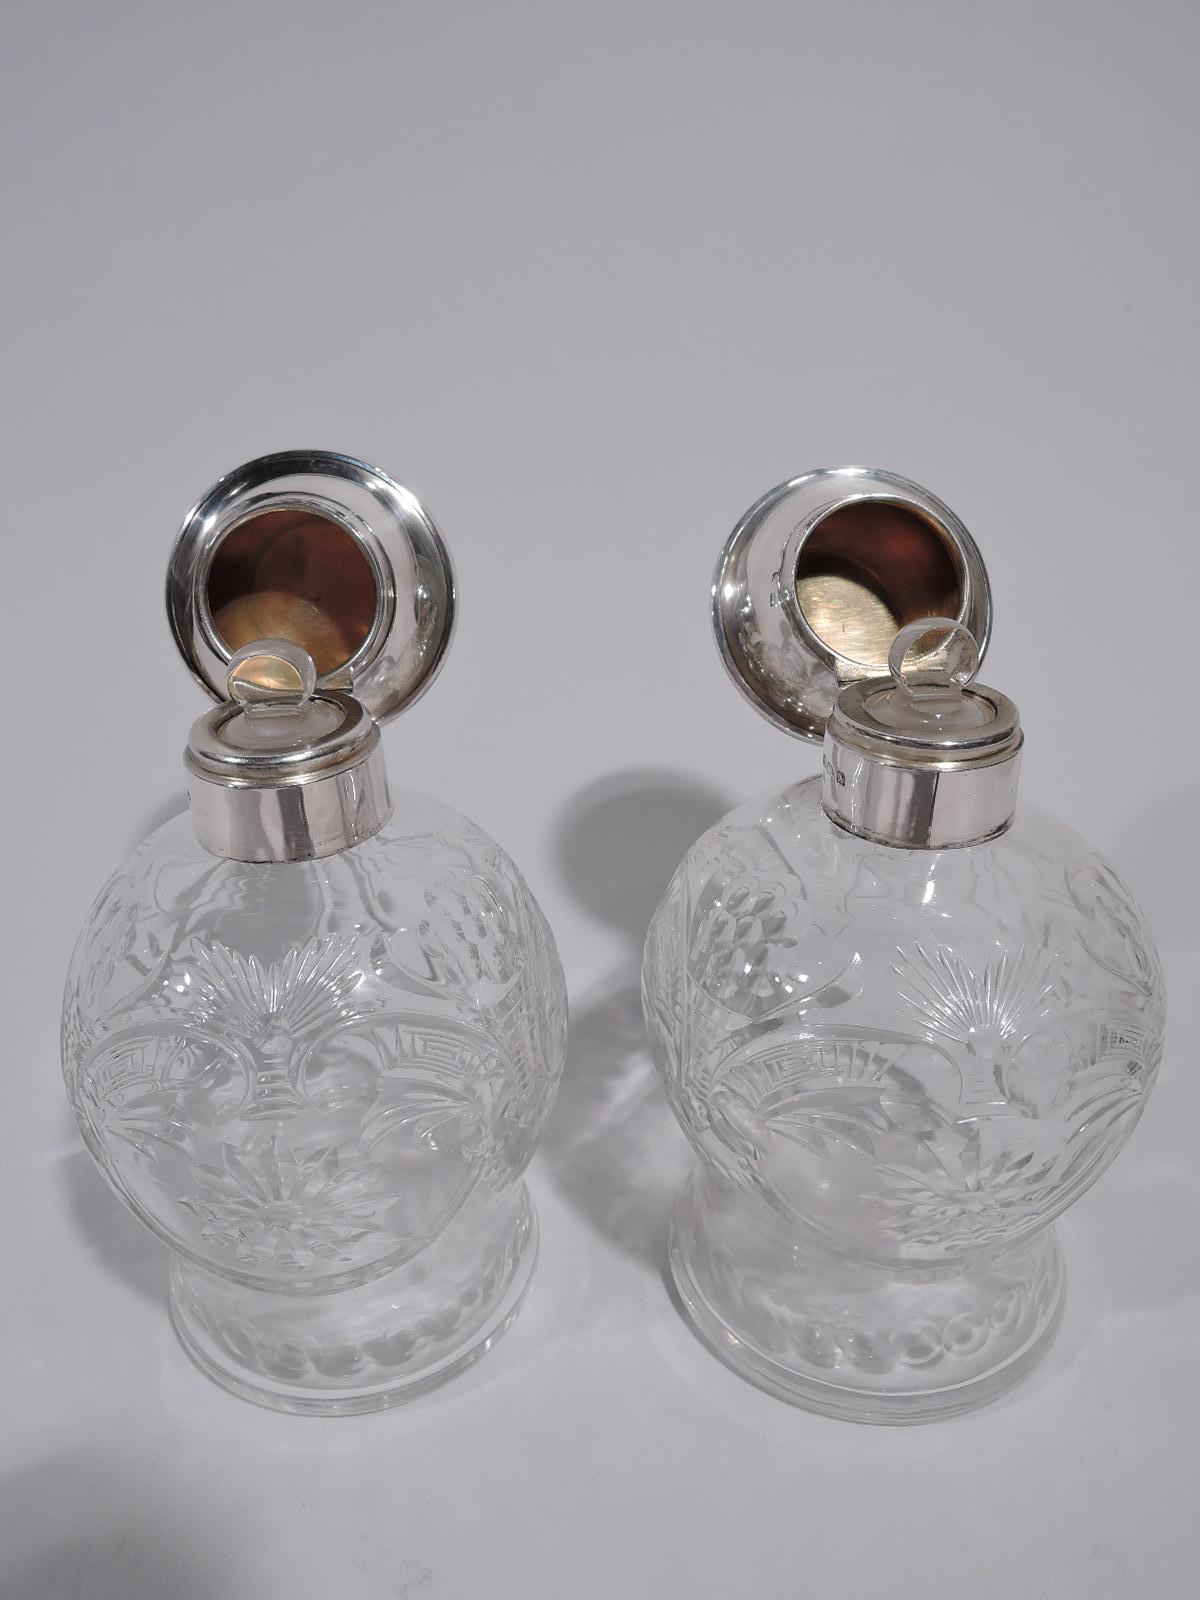 Pair of George V perfumes. Made by Adie Bros in Birmingham in 1925. Each: Crystal baluster bowl with scrolls, flowers, swags, and paterae. Short neck with sterling silver collar and hinged truncated-cone cover. Cover top flat with engine-turned wave